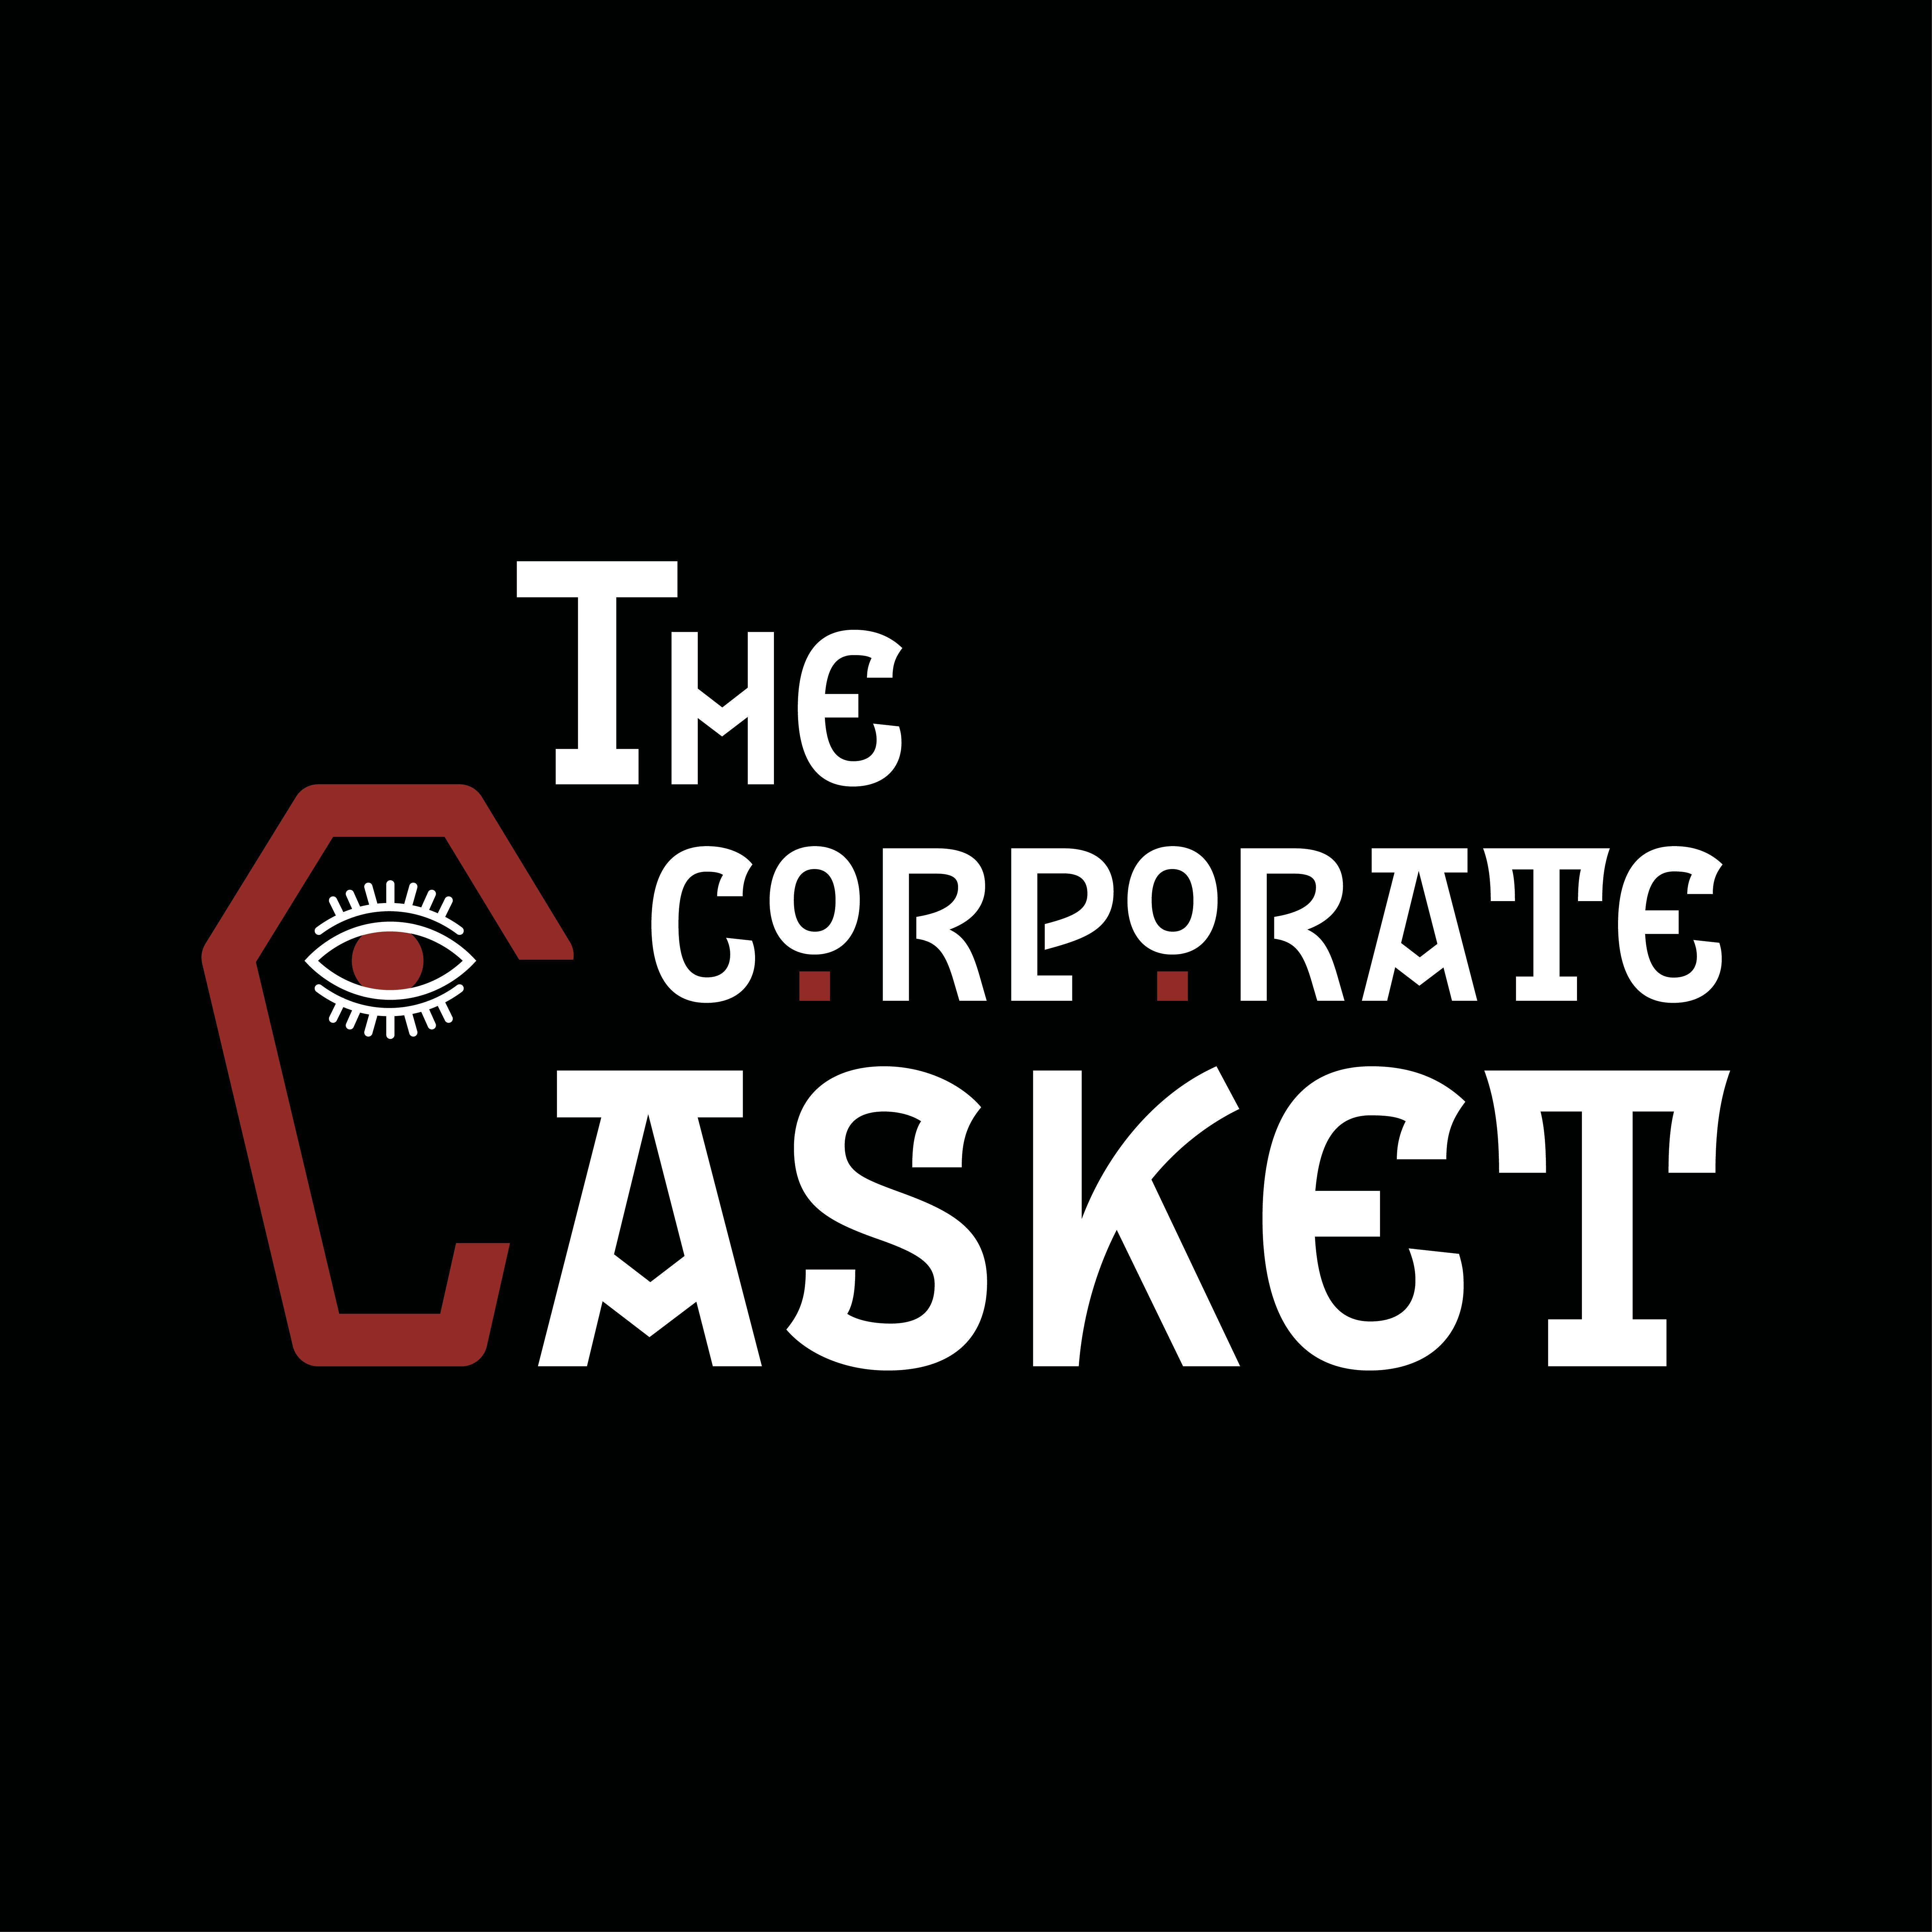 Tech Support Scams: Corporate Casket